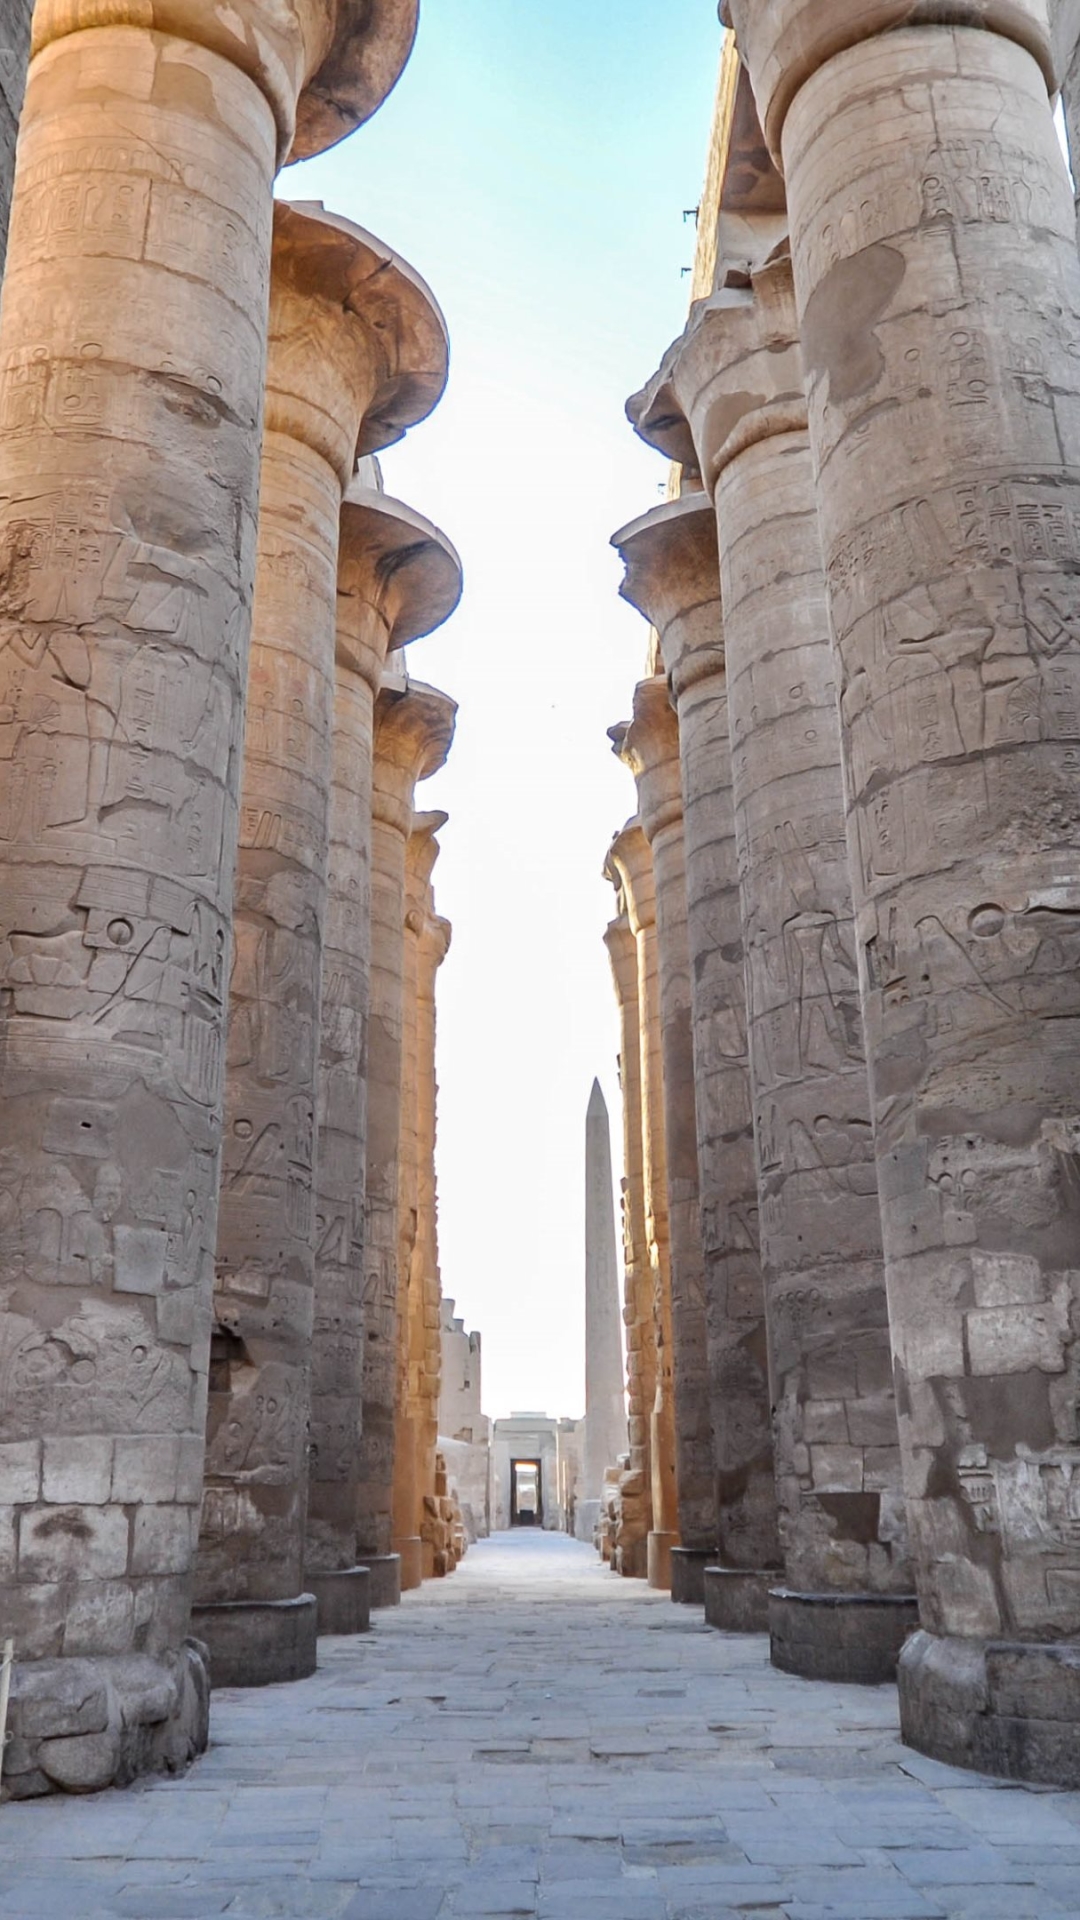 Great Hypostyle Hall in Karnak Temple